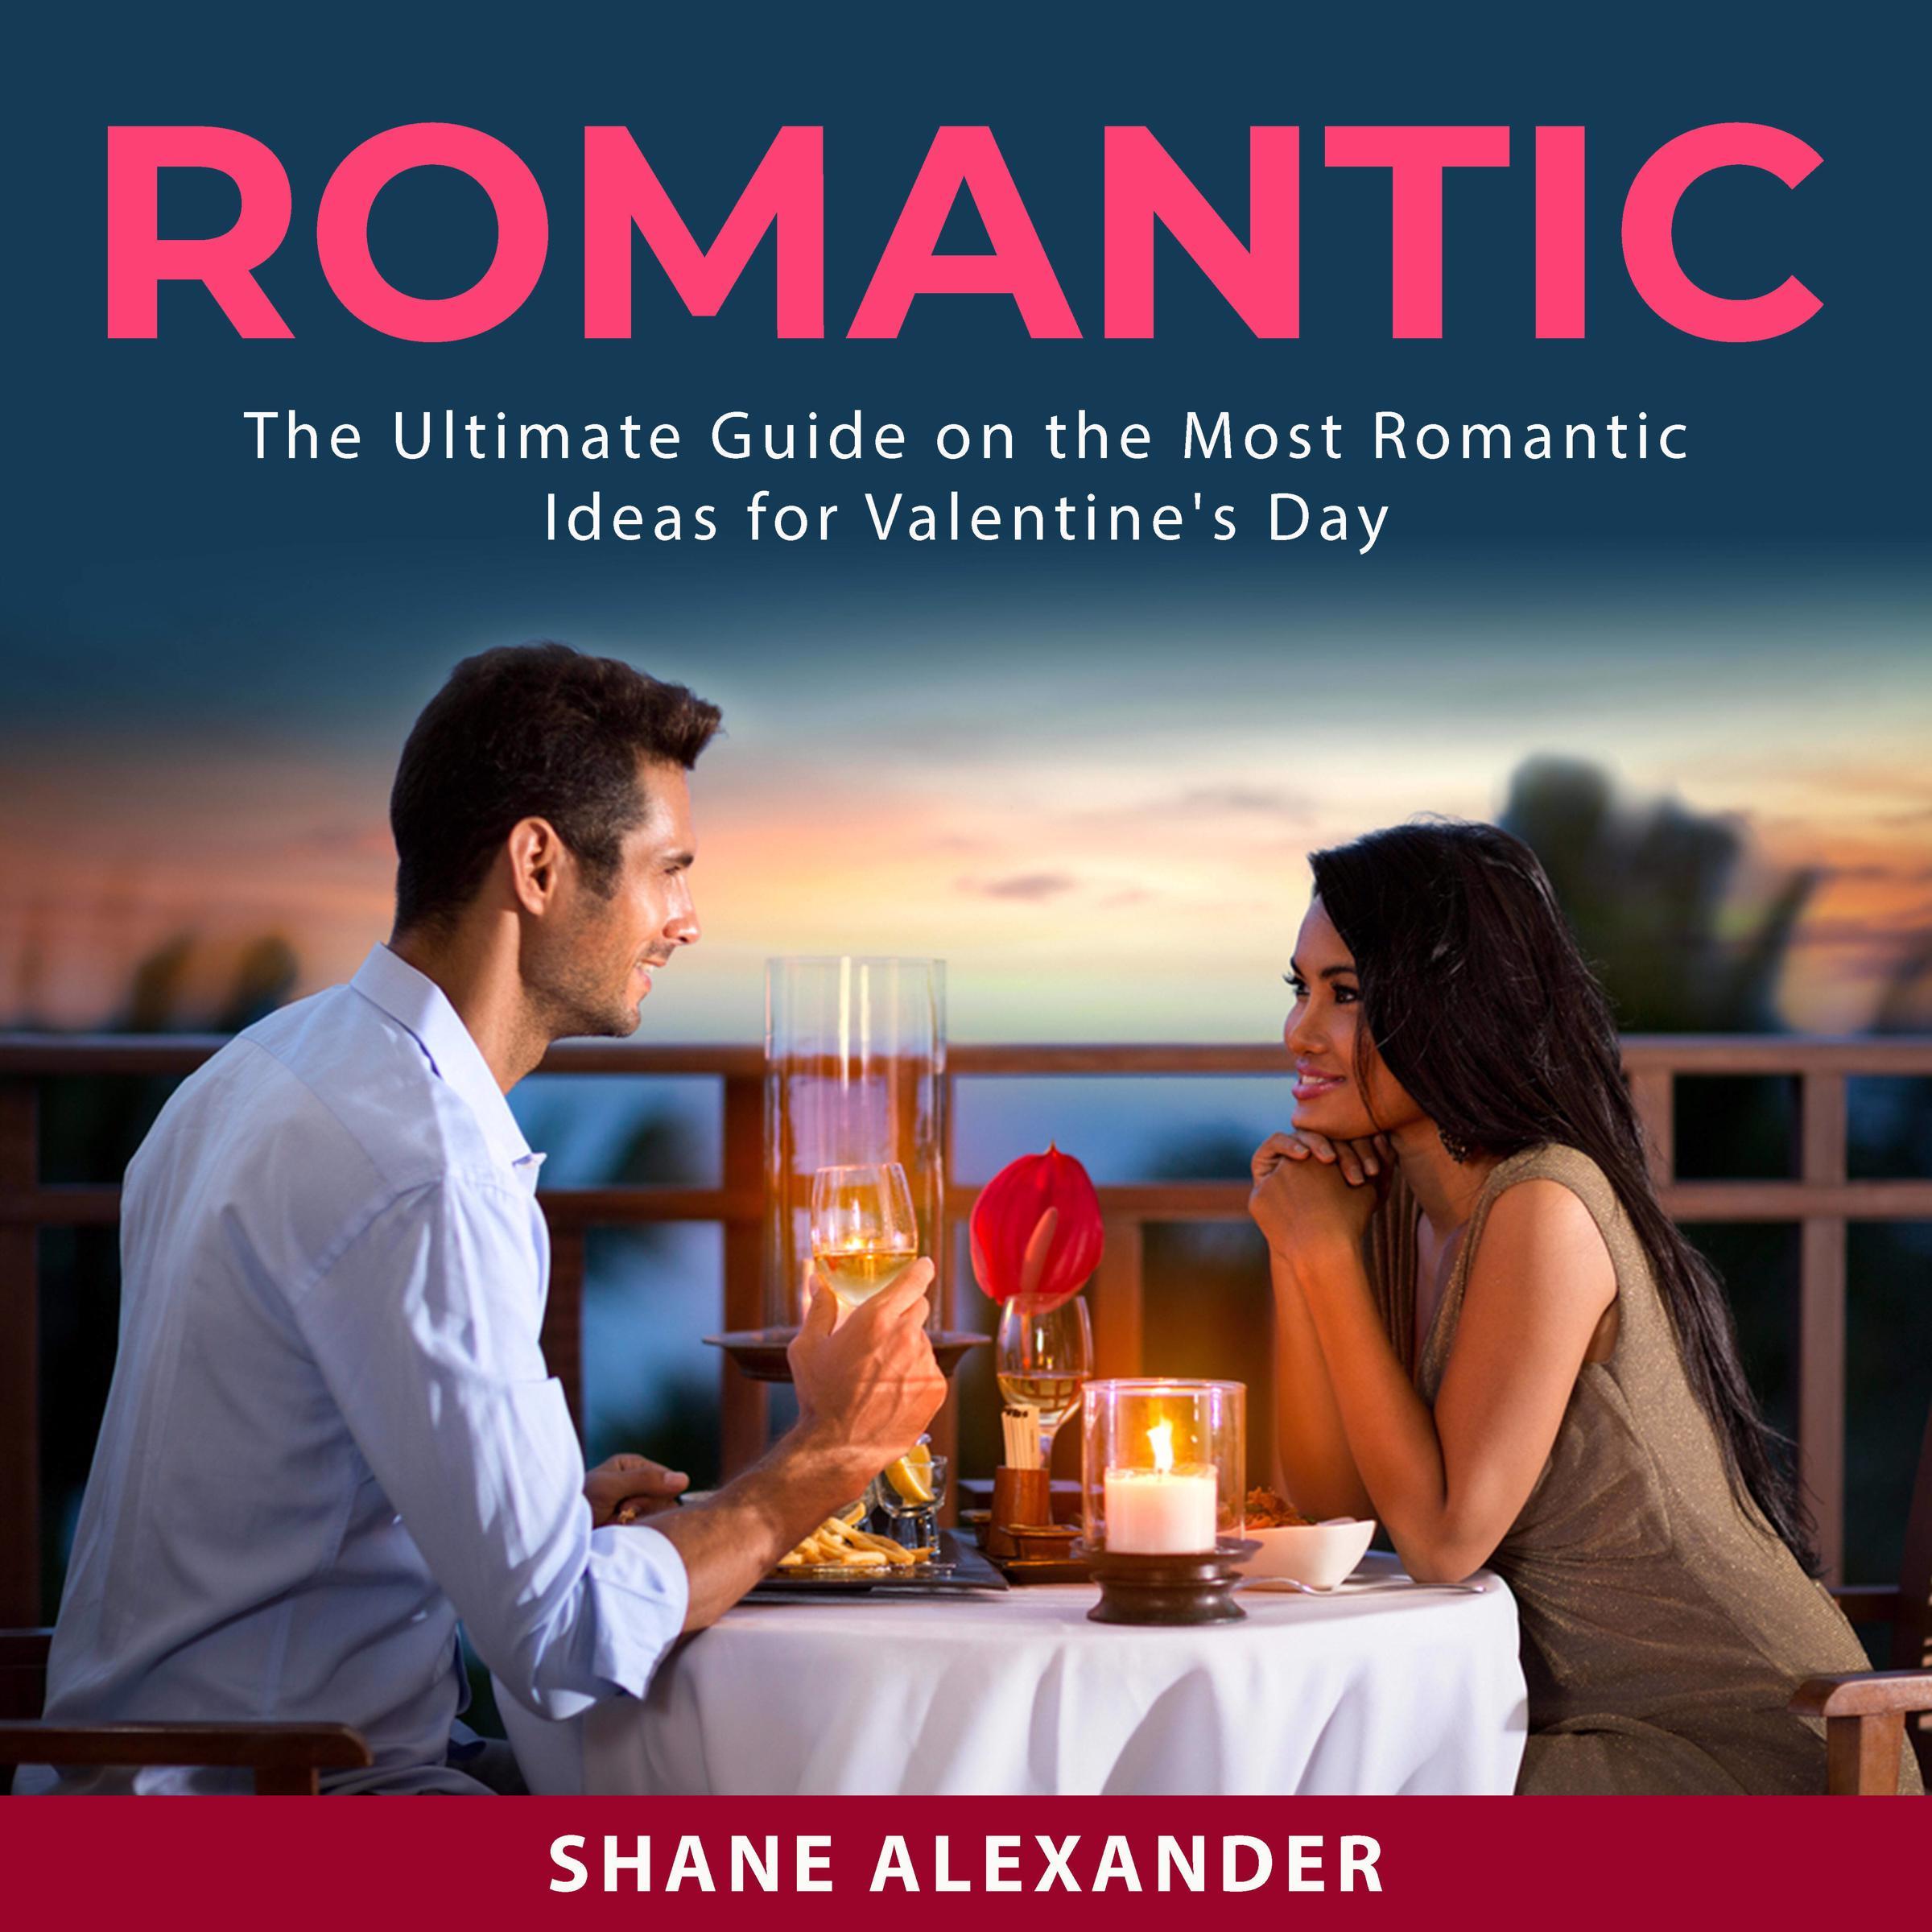 Romantic: The Ultimate Guide on the Most Romantic Ideas for Valentine's Day